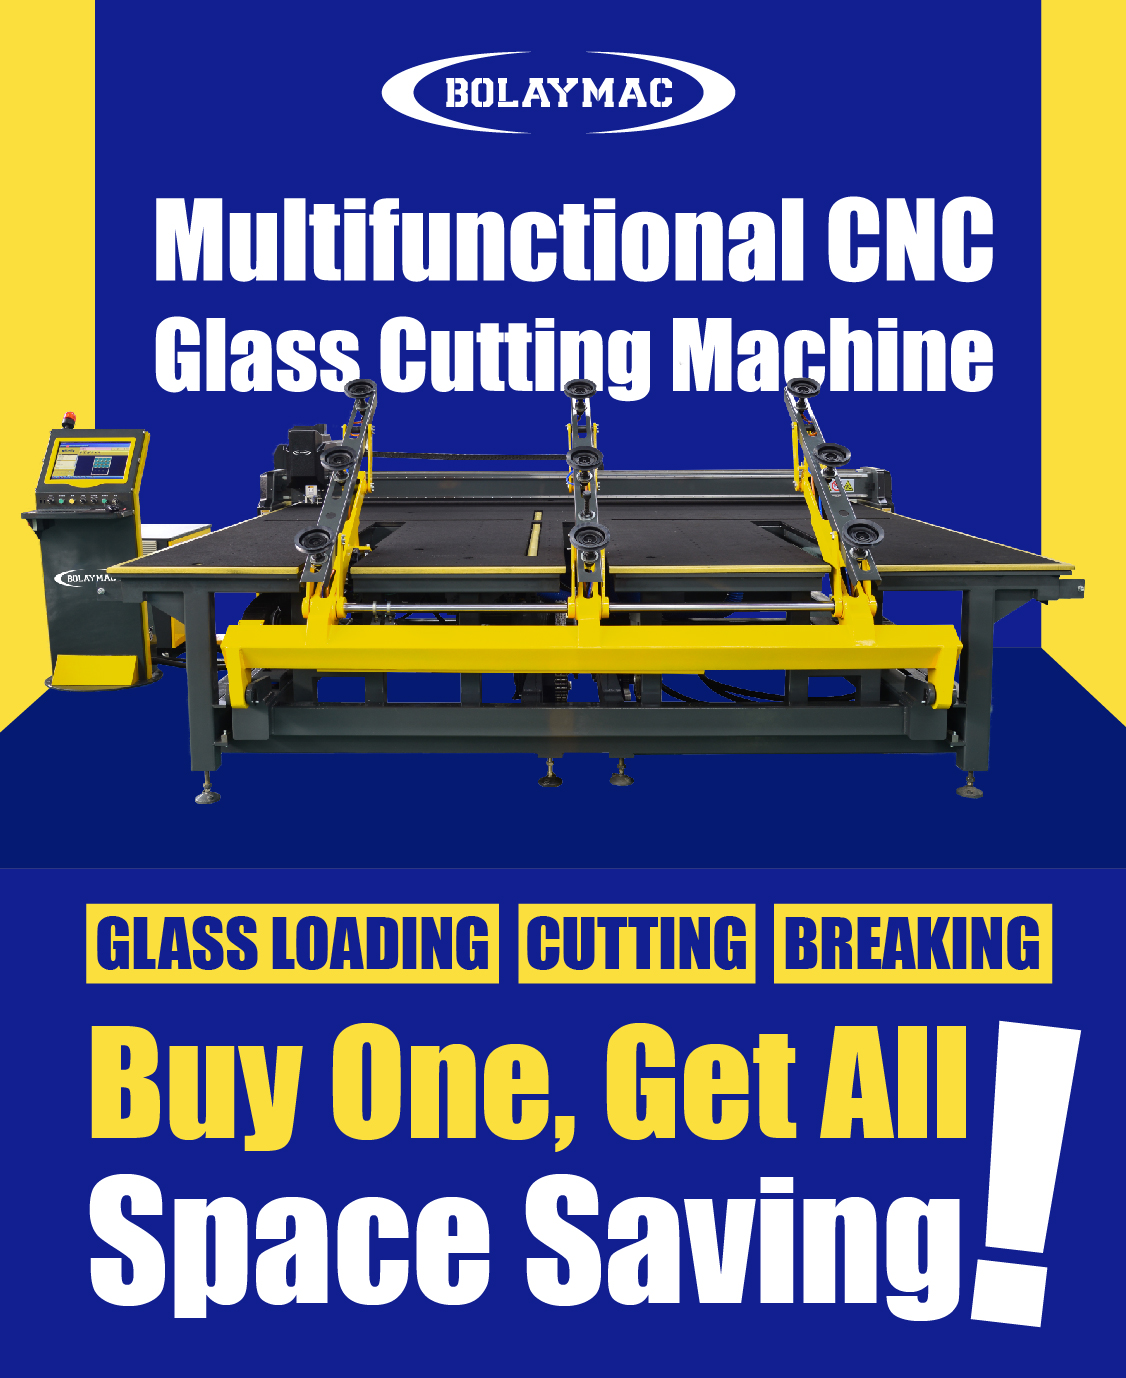 multifunctional cutting table